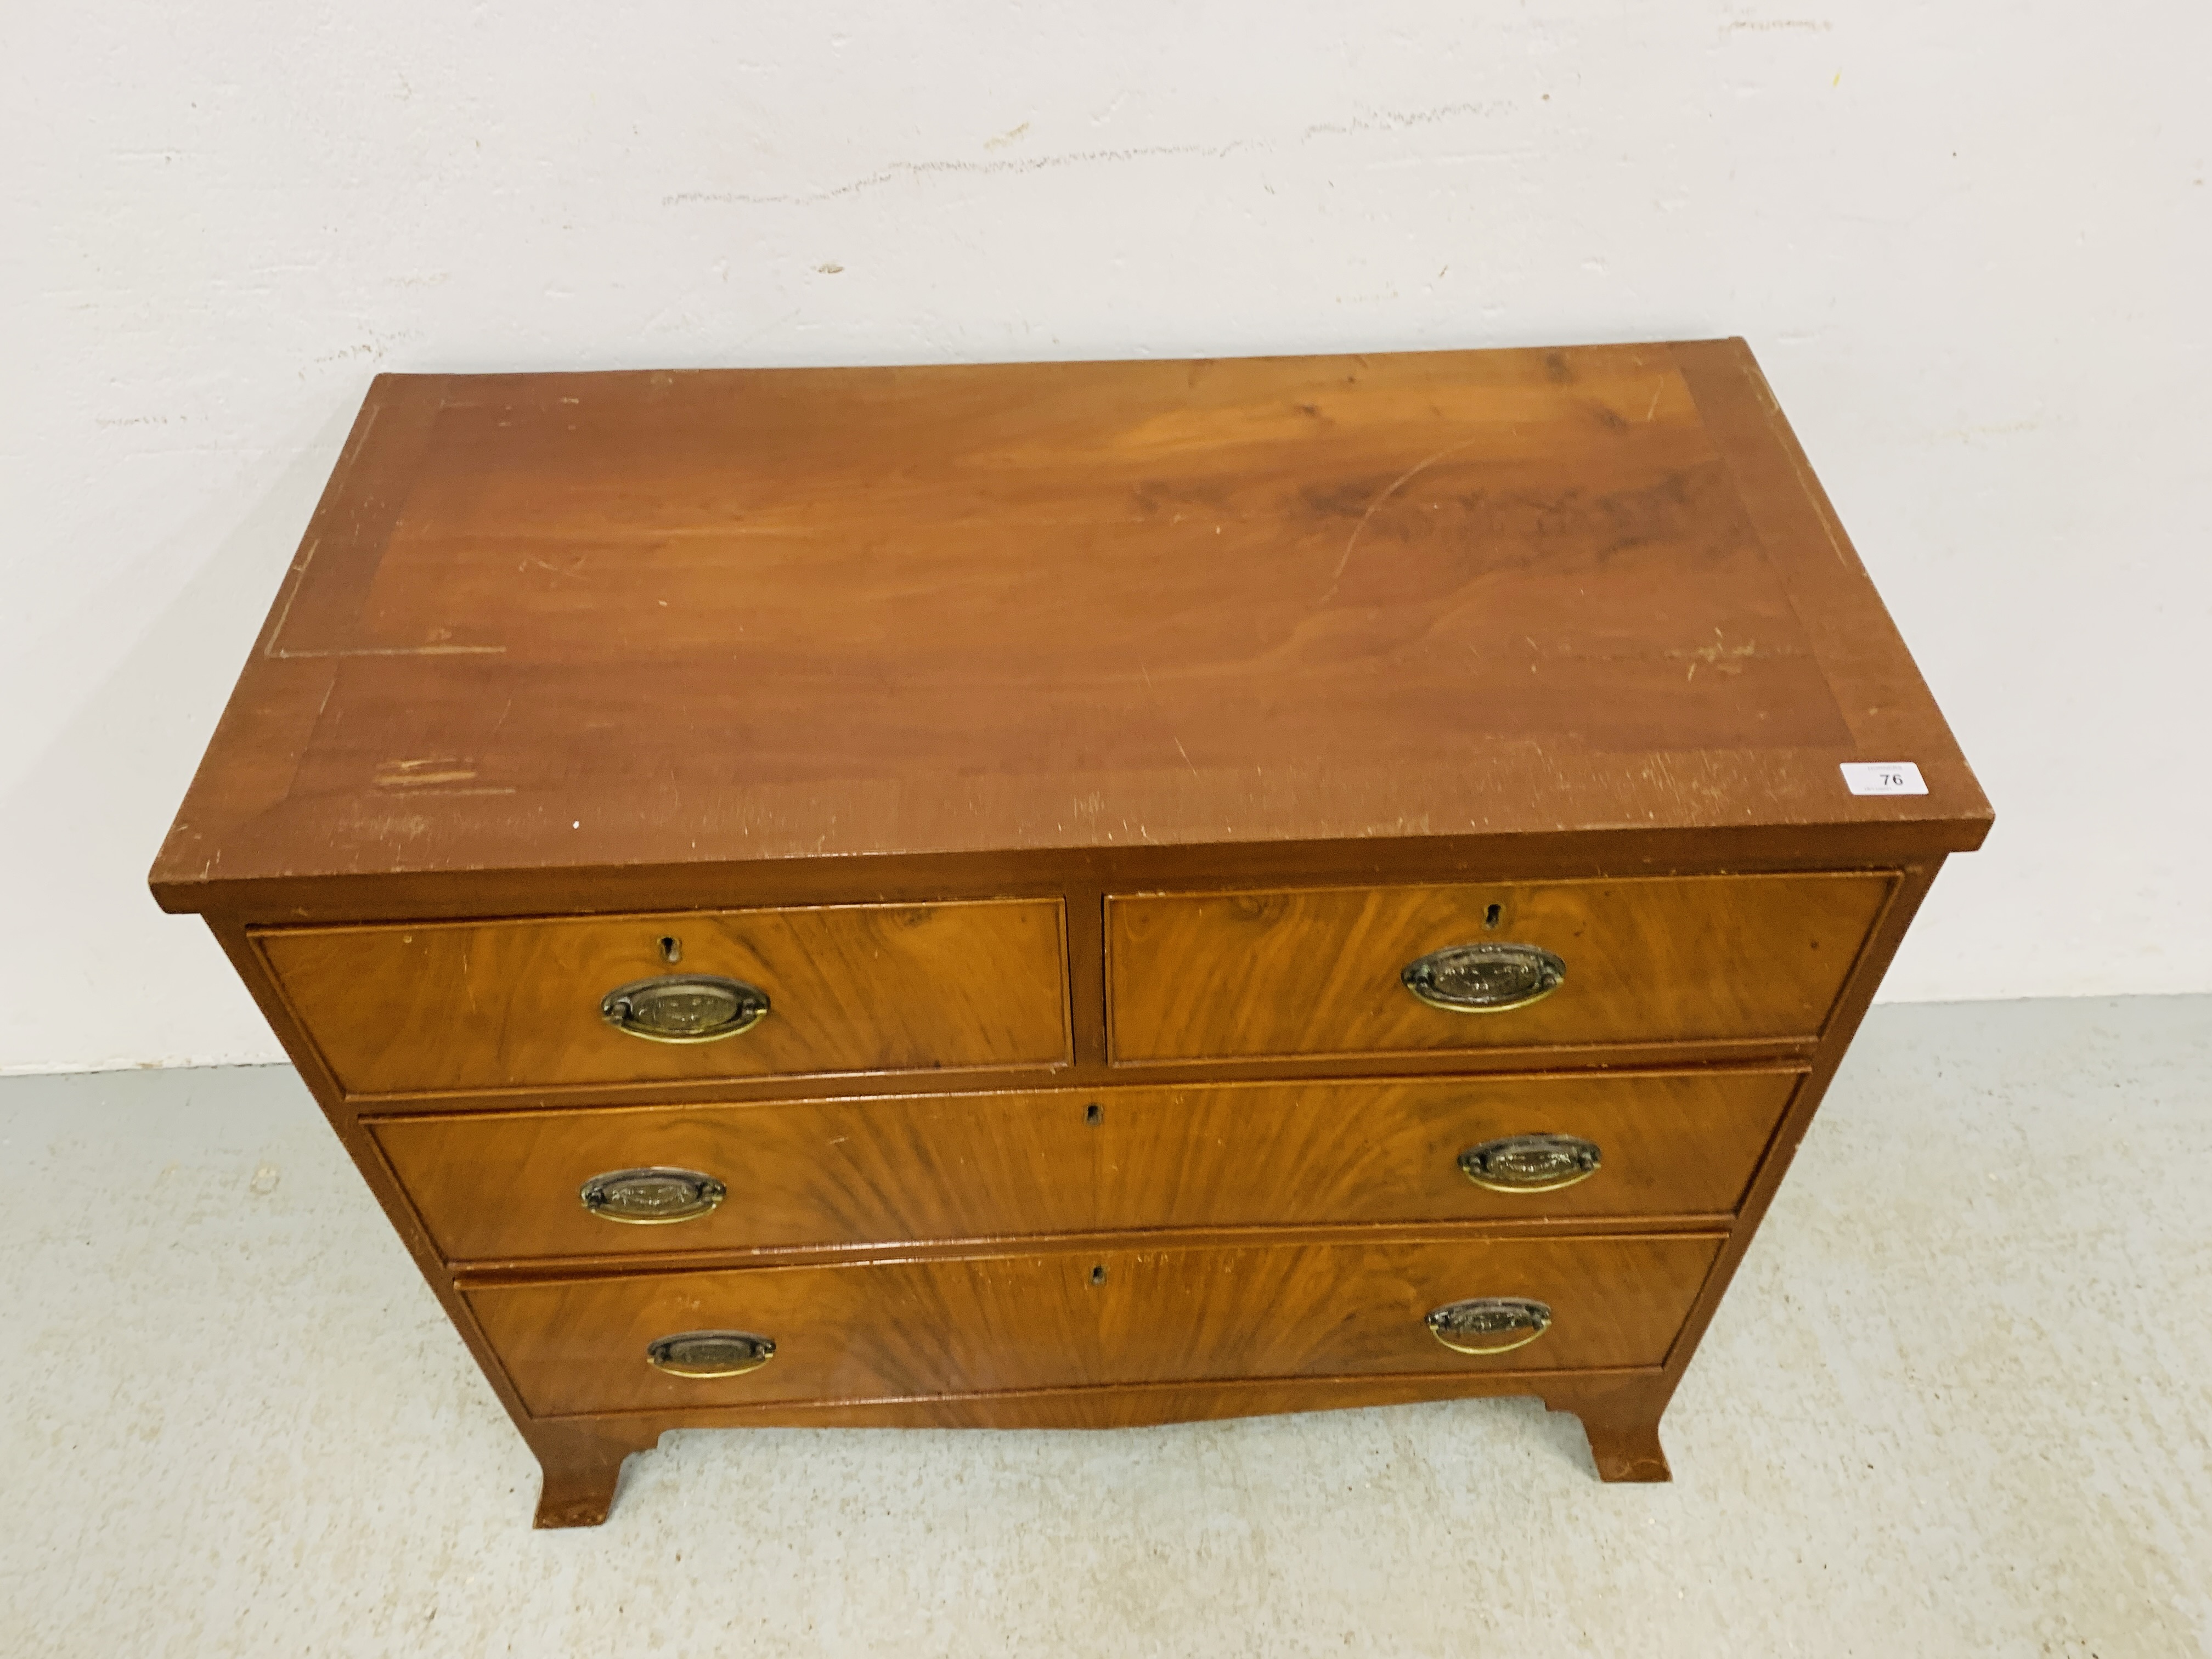 AN EARLY C19TH EDWARDIAN TWO OVER TWO DRAWER CHEST WITH BRASS HANDLES - W 91CM. D 44CM. H 80CM. - Image 2 of 8